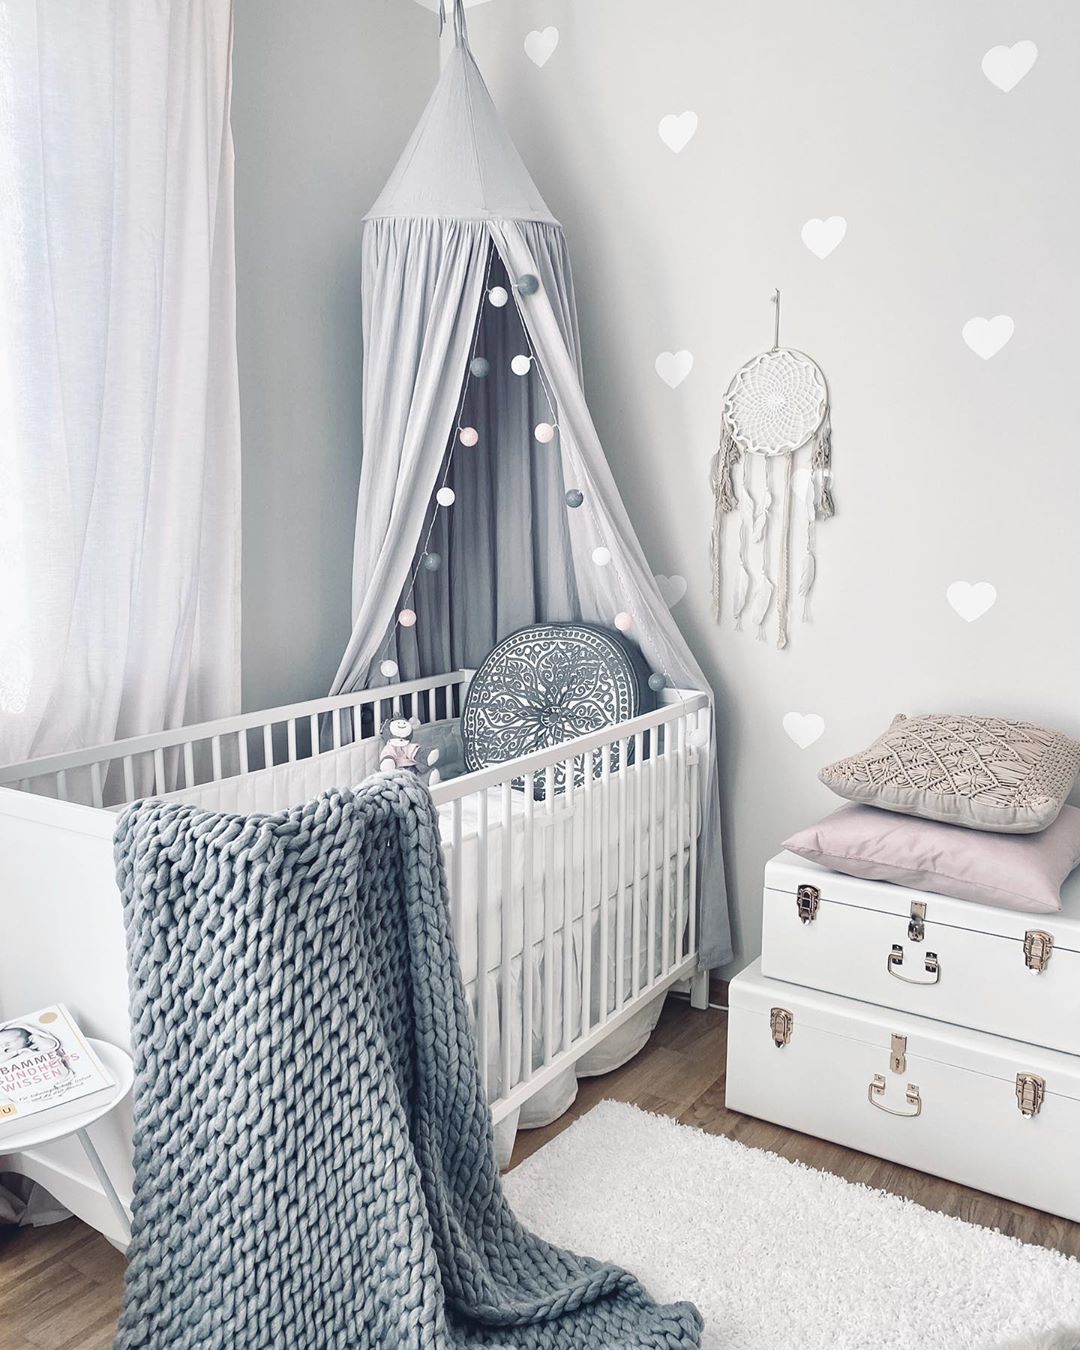 Gray baby room with white hearts and white furniture. Photo by Instagram user @girlsbabyroom